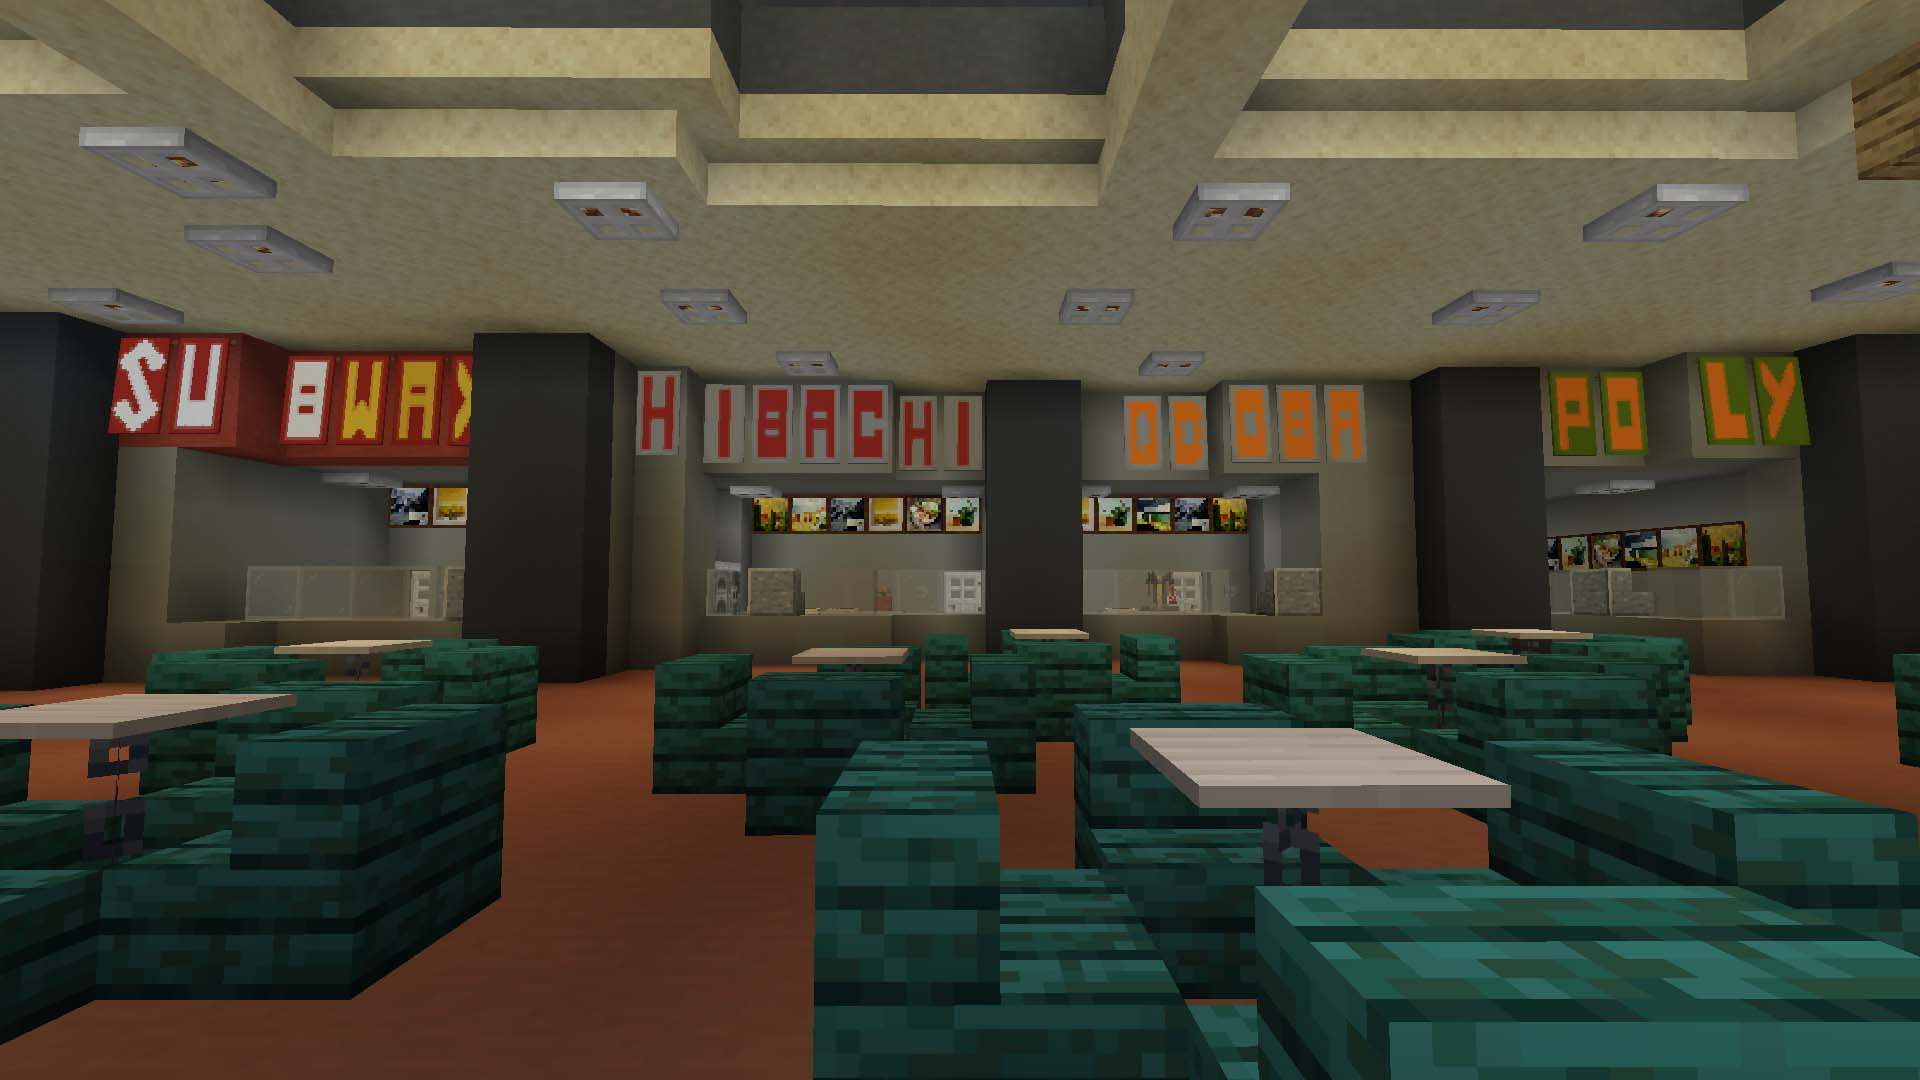 A recreation of a Cal Poly Pomona food court in Minecraft. Food court signage: Subway, Hibachi, Qdoba and Poly.